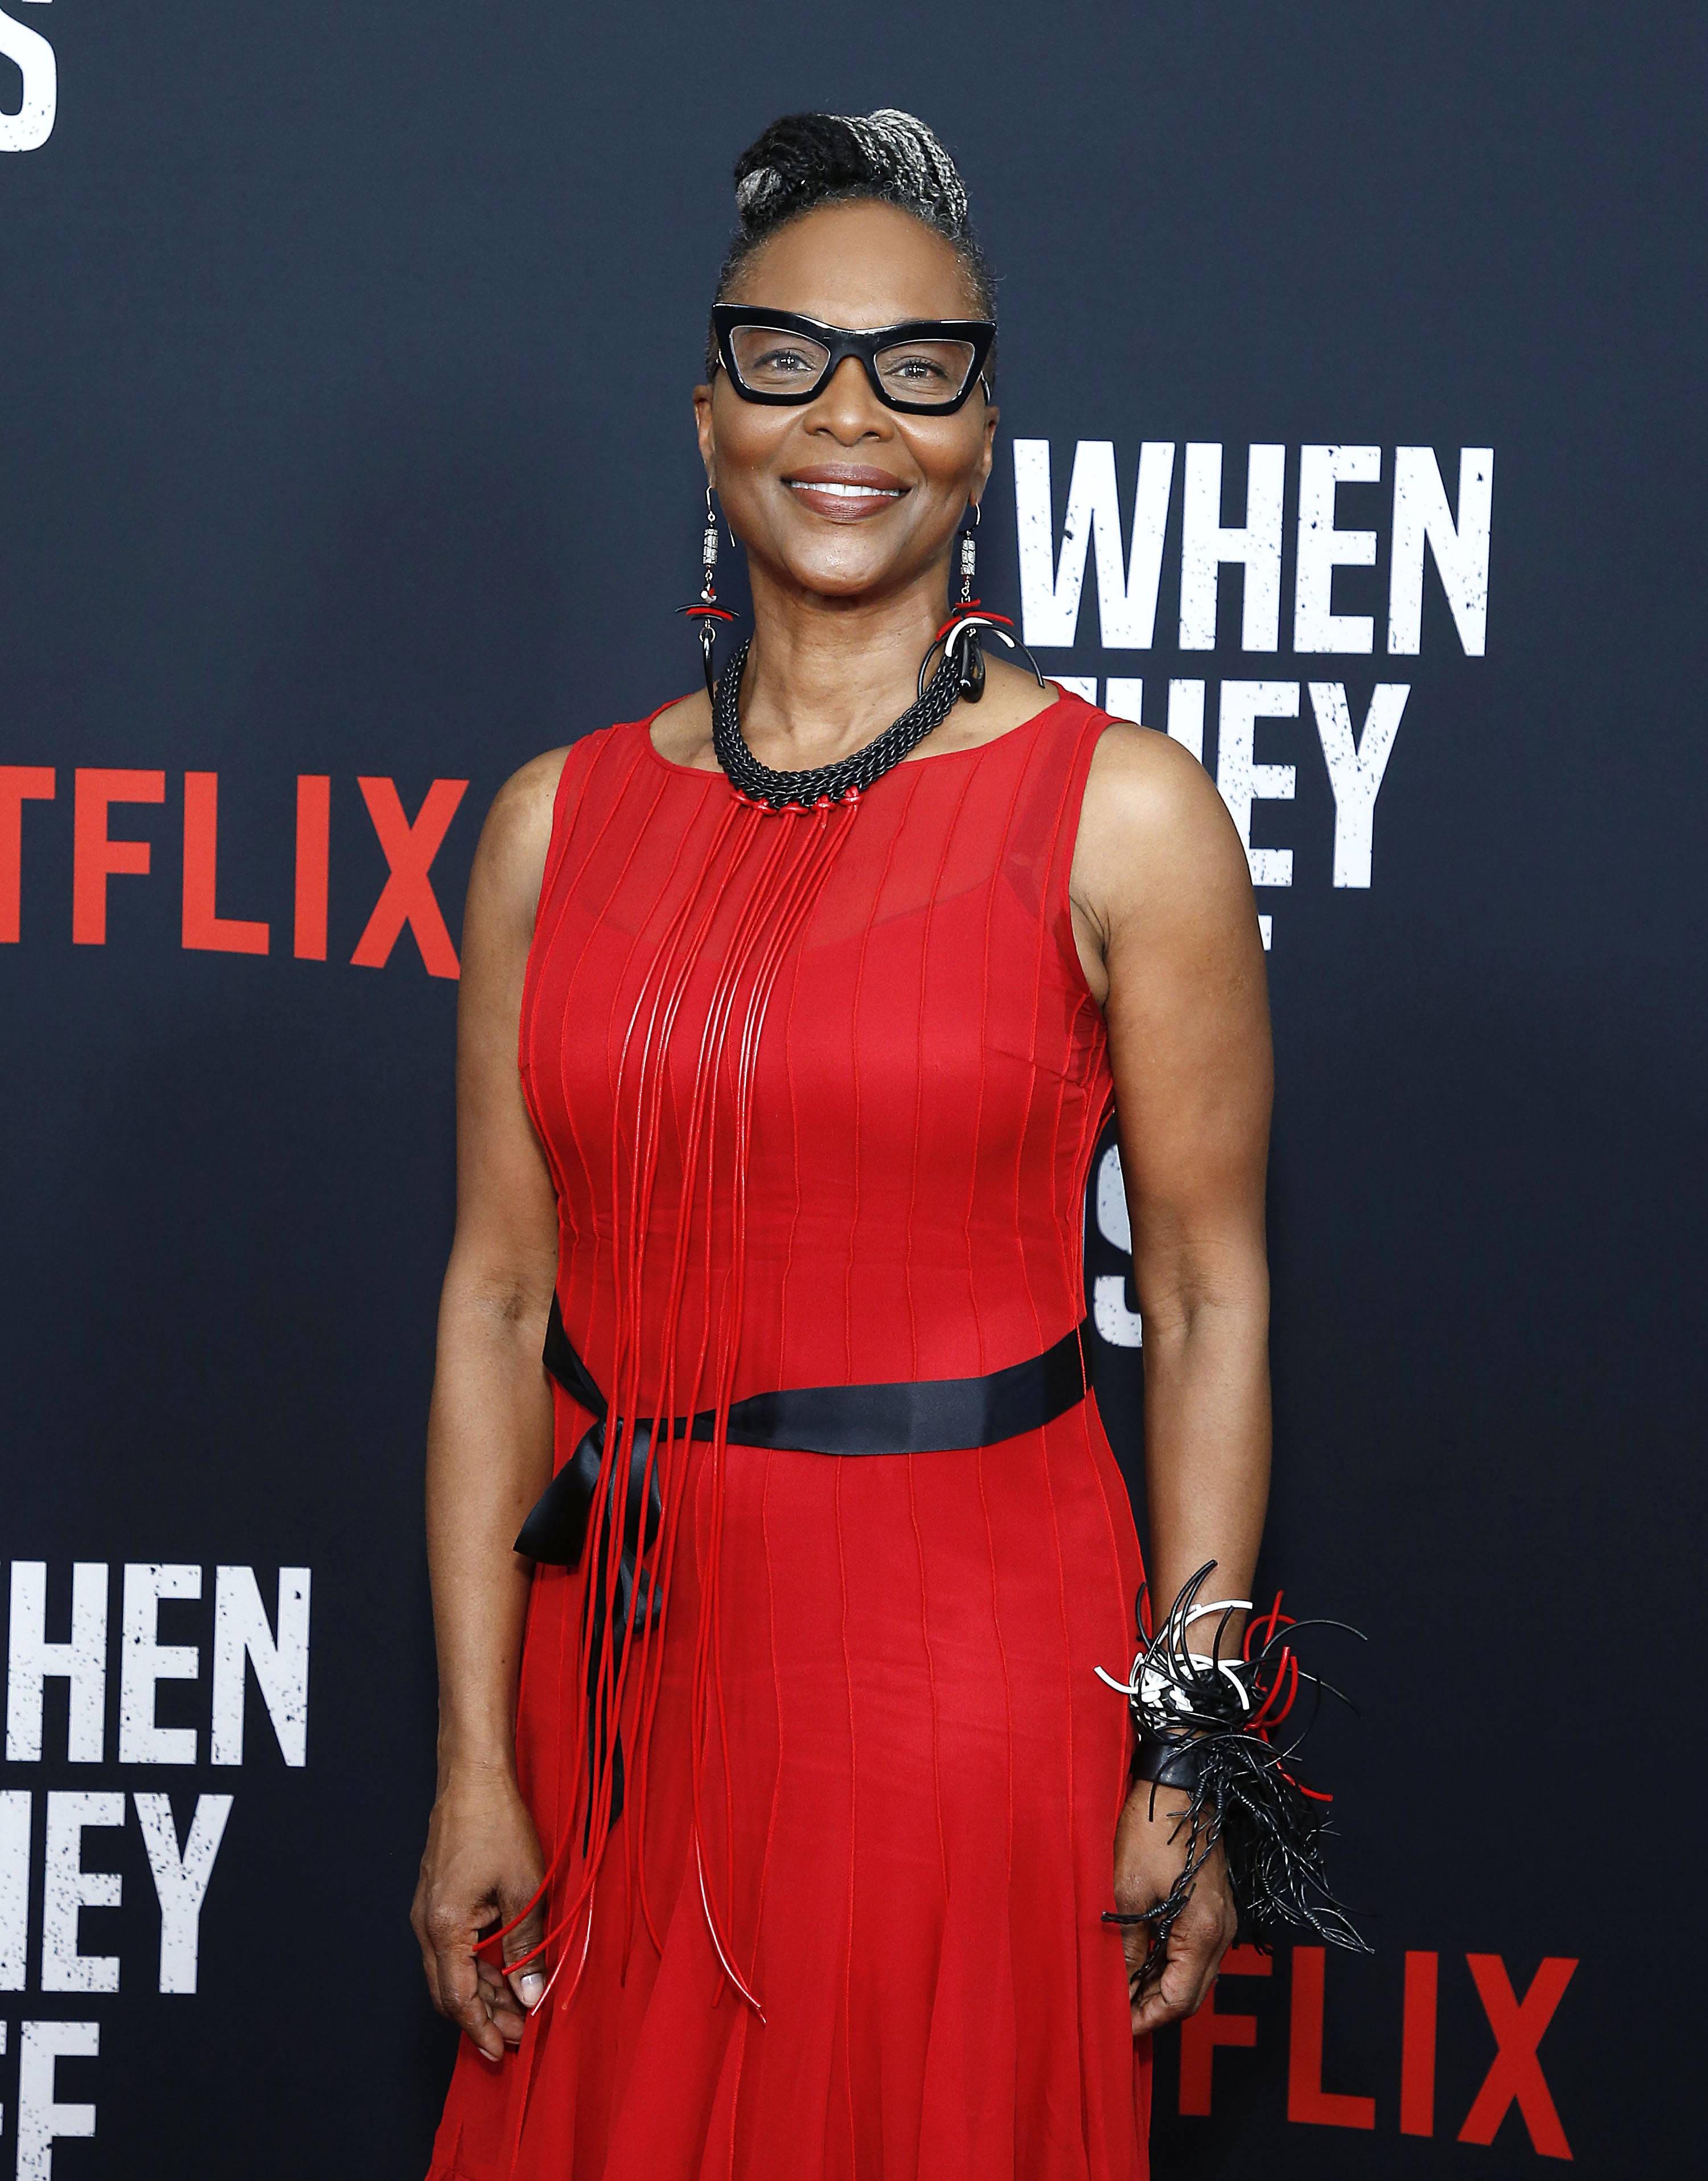 NEW YORK, NEW YORK - MAY 20: Suzzanne Douglas attends "When They See Us" World Premiere at The Apollo Theater on May 20, 2019 in New York City. (Photo by John Lamparski/Getty Images)